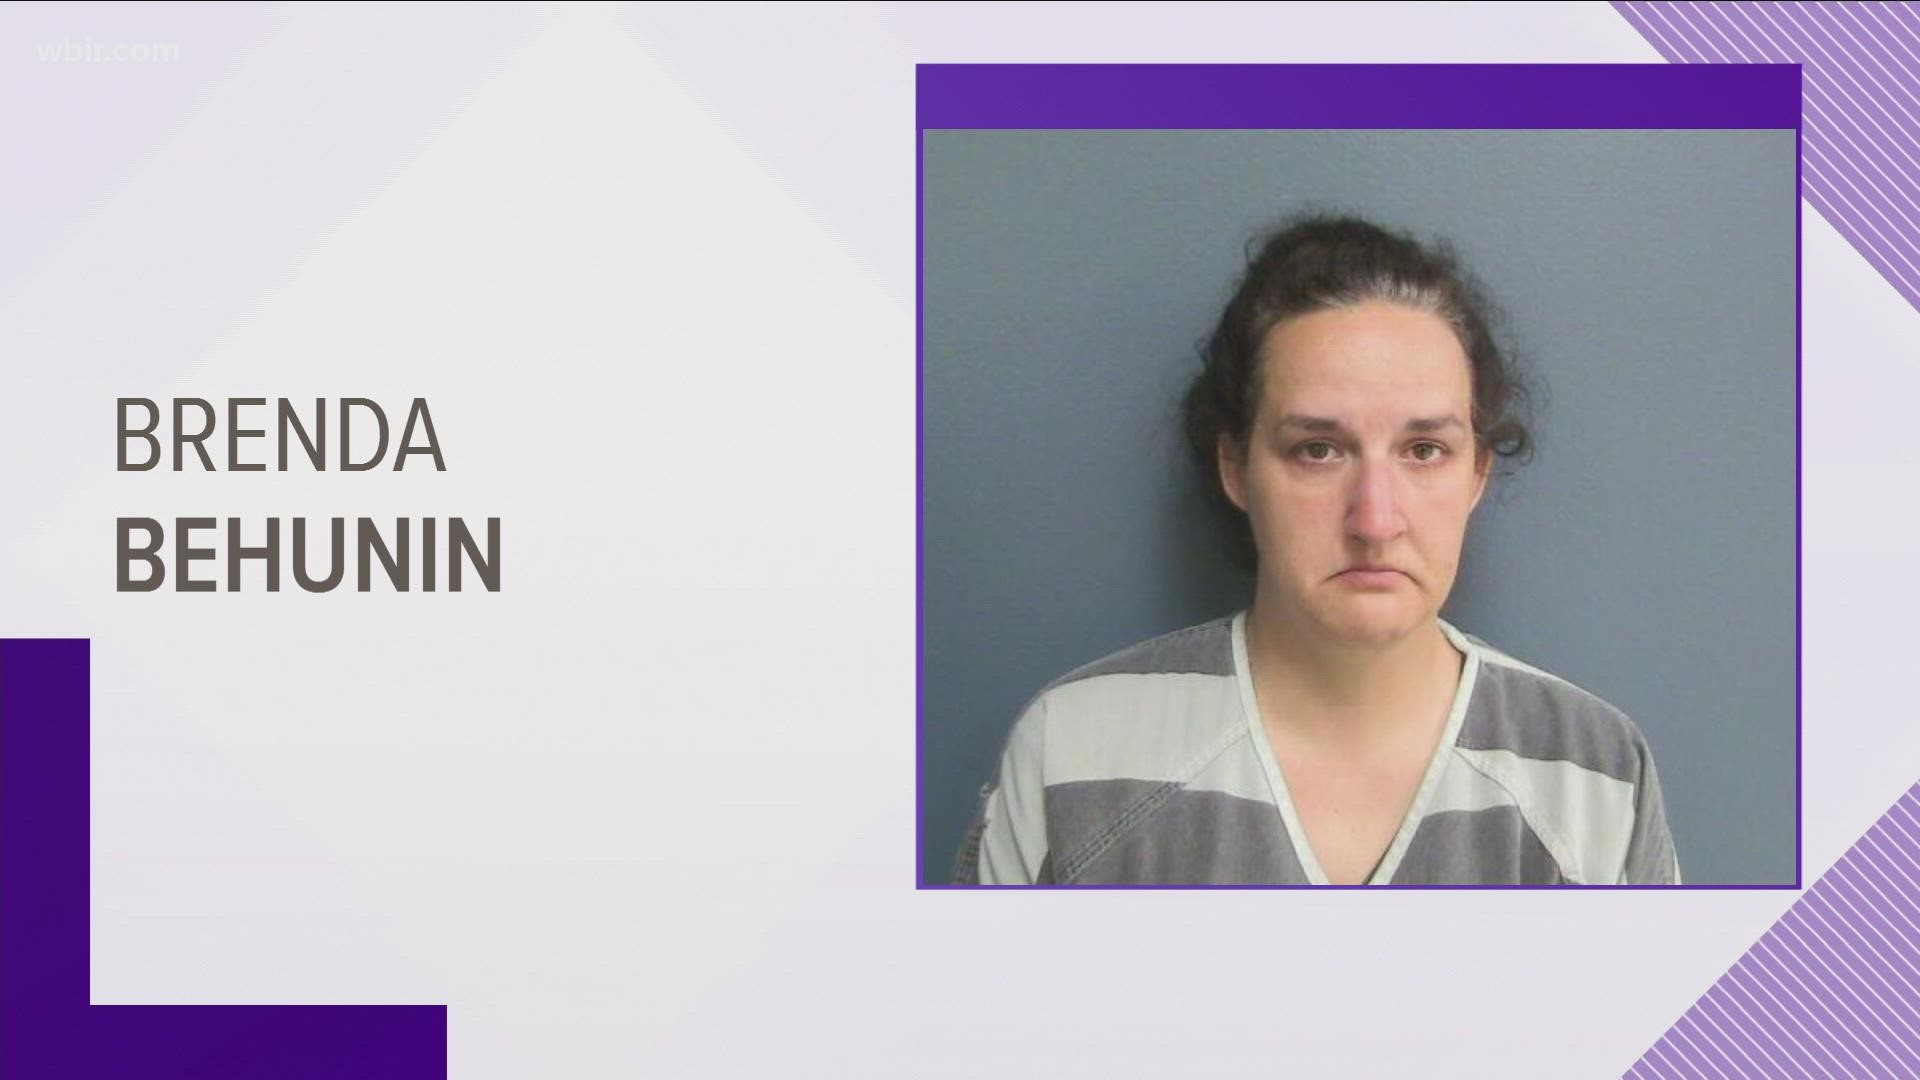 Court documents show Brenda Behunin was indicted in the death of a 3-year-old boy and the neglect of four other children.